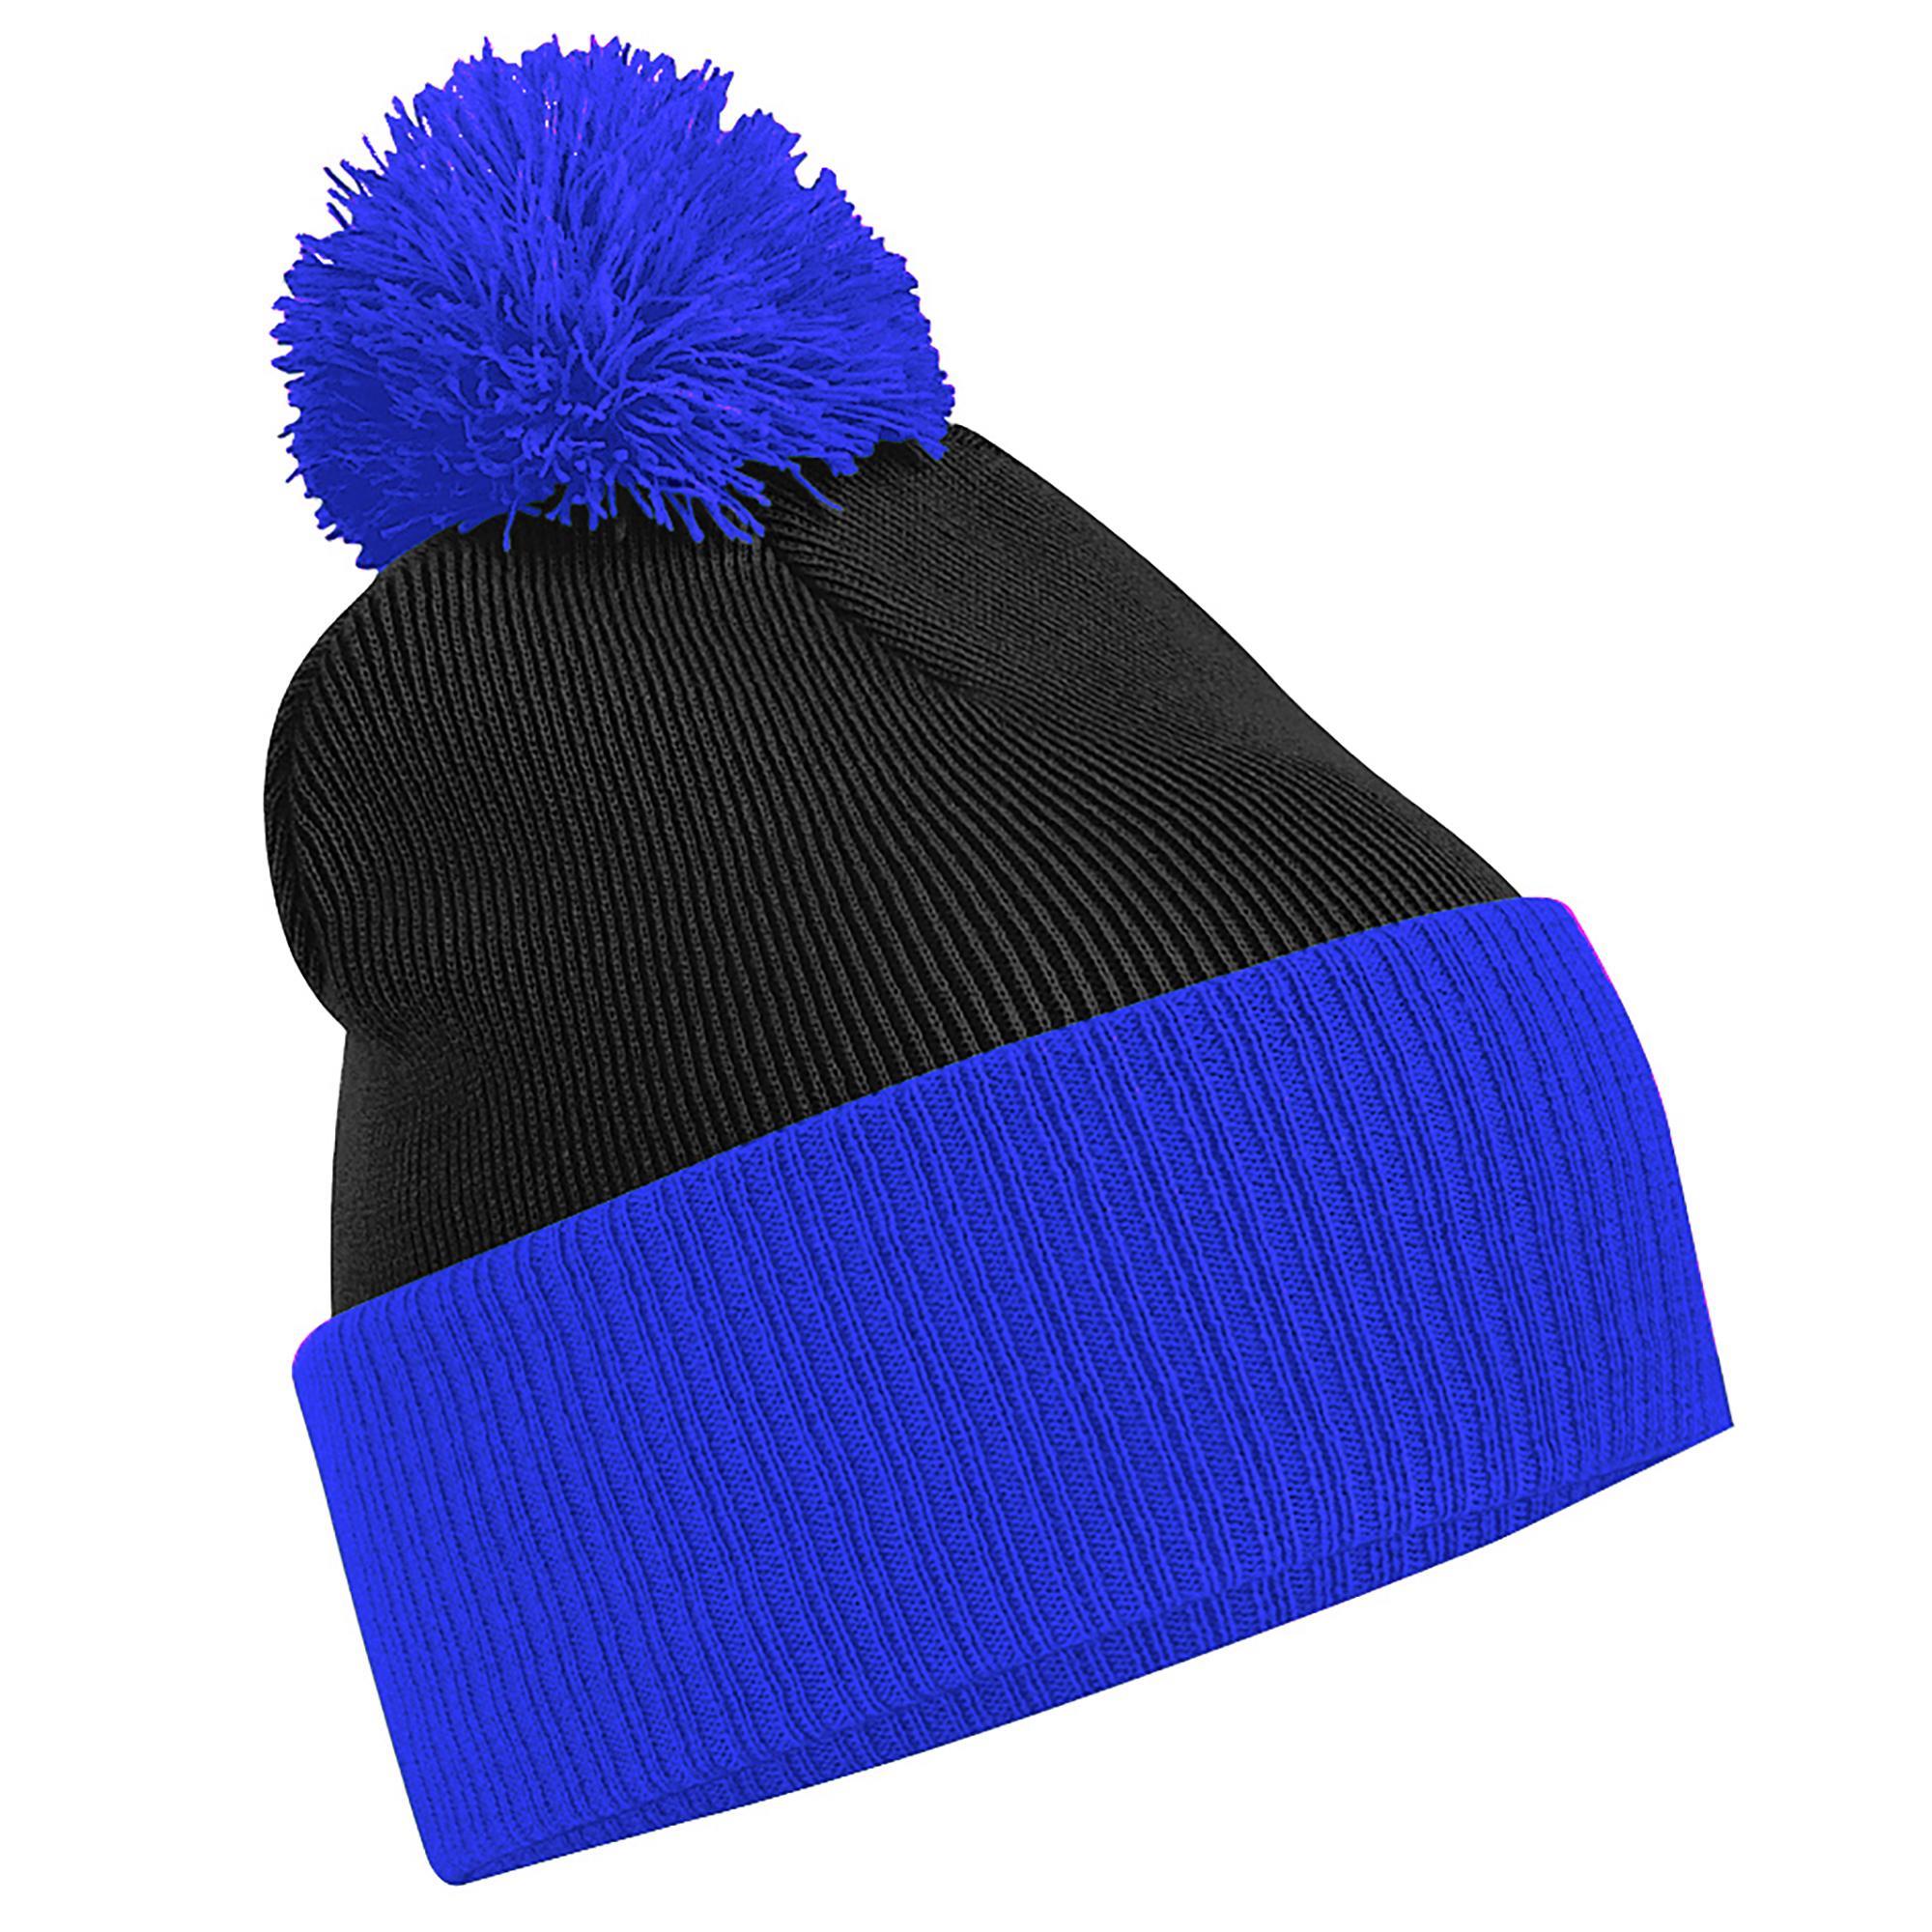 Beechfield Kids Snowstar Duo Two-Tone Winter Beanie Hat (Black / Bright Royal) (One Size)